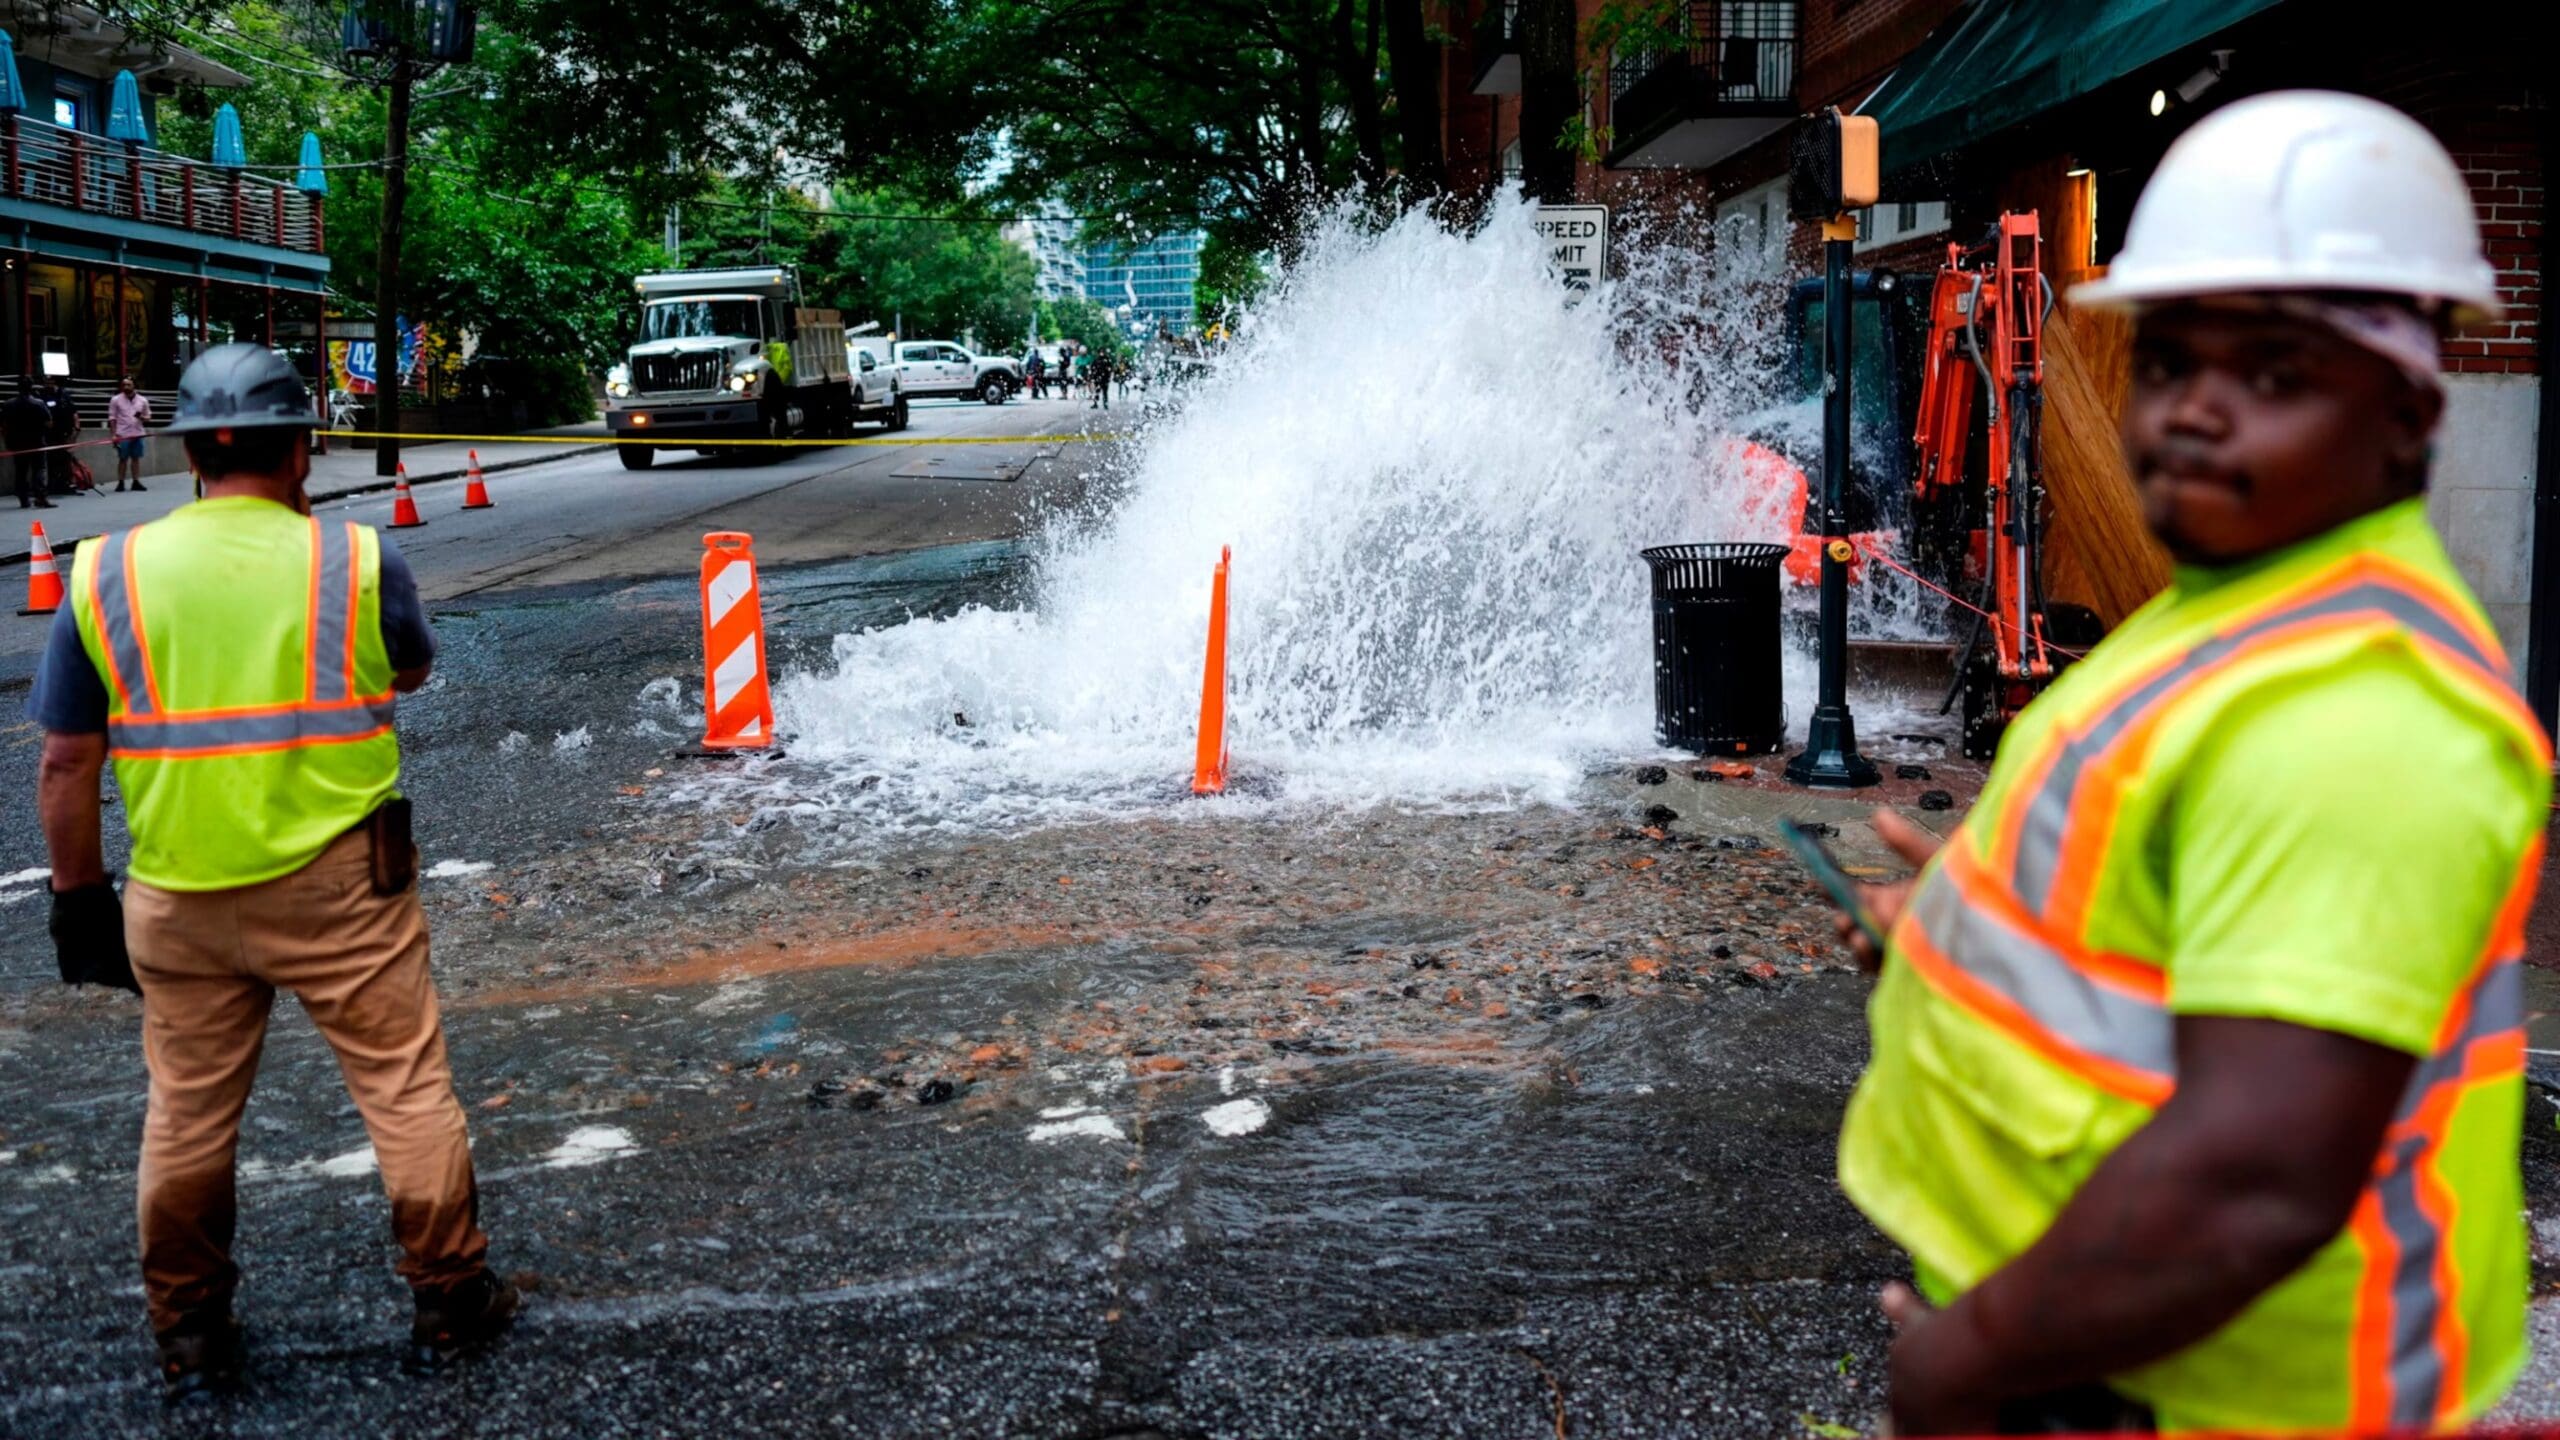 Say What Now? Atlanta Mayor Declares State of Emergency Following Water Main Breaks, Hospital That Moved Patients Resumes Normal Operations